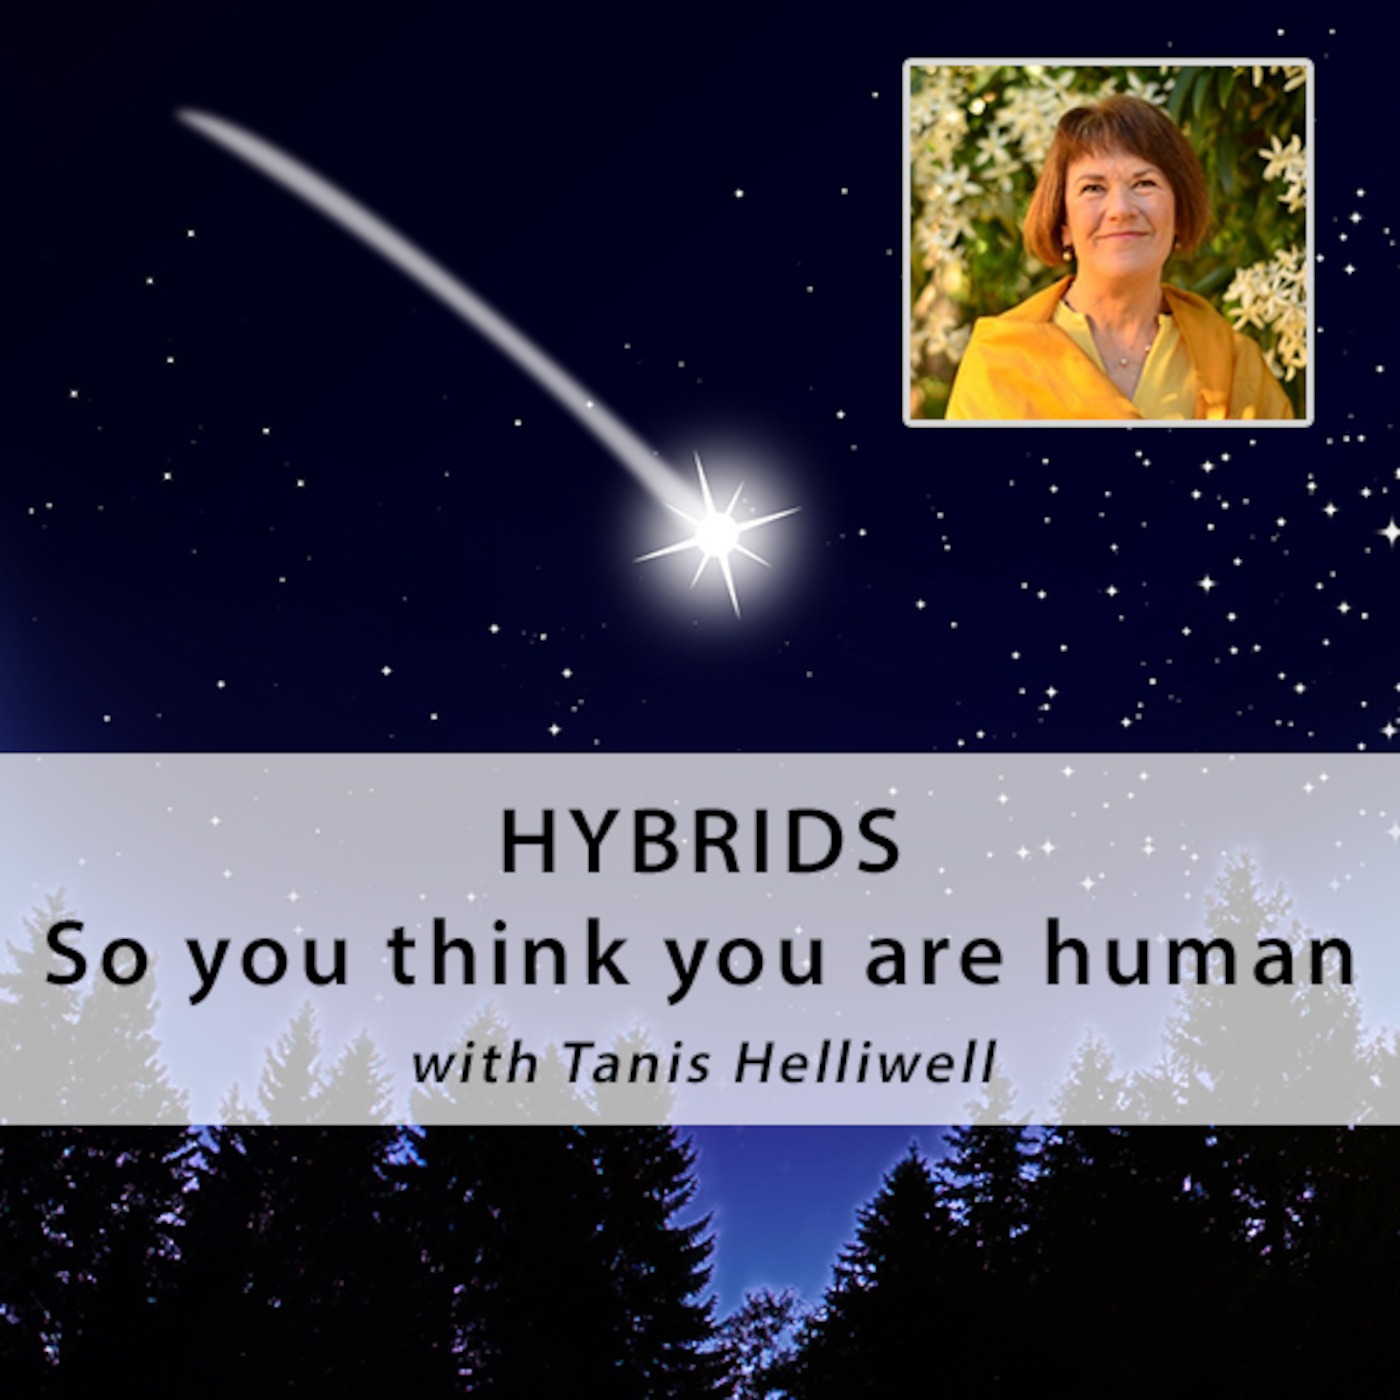 HYBRIDS: So you think you are human (Intro)